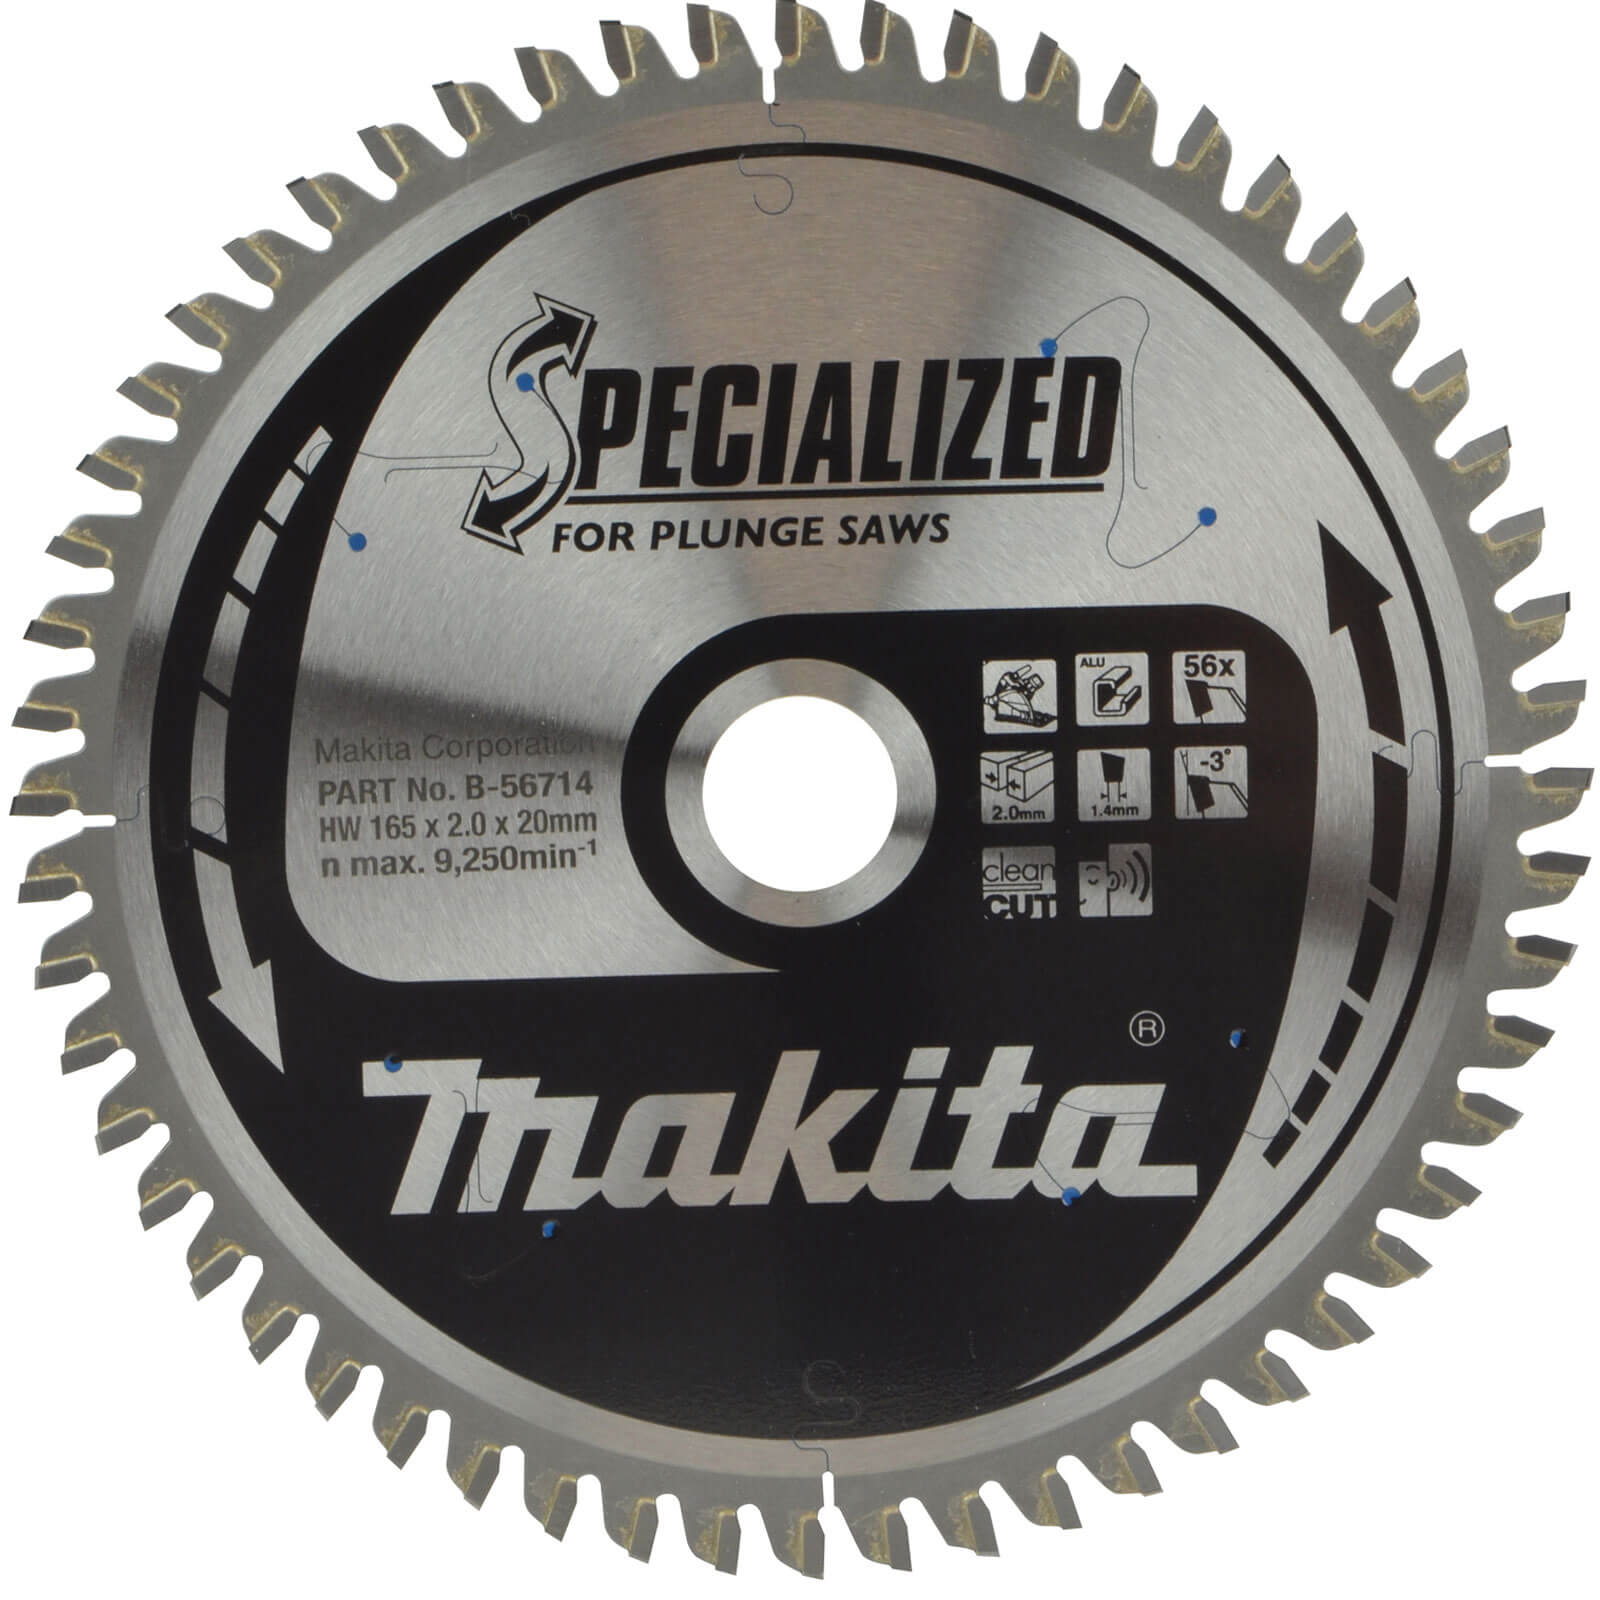 Image of Makita SPECIALIZED Plunge Saw Aluminium Cutting Saw Blade 165mm 56T 20mm